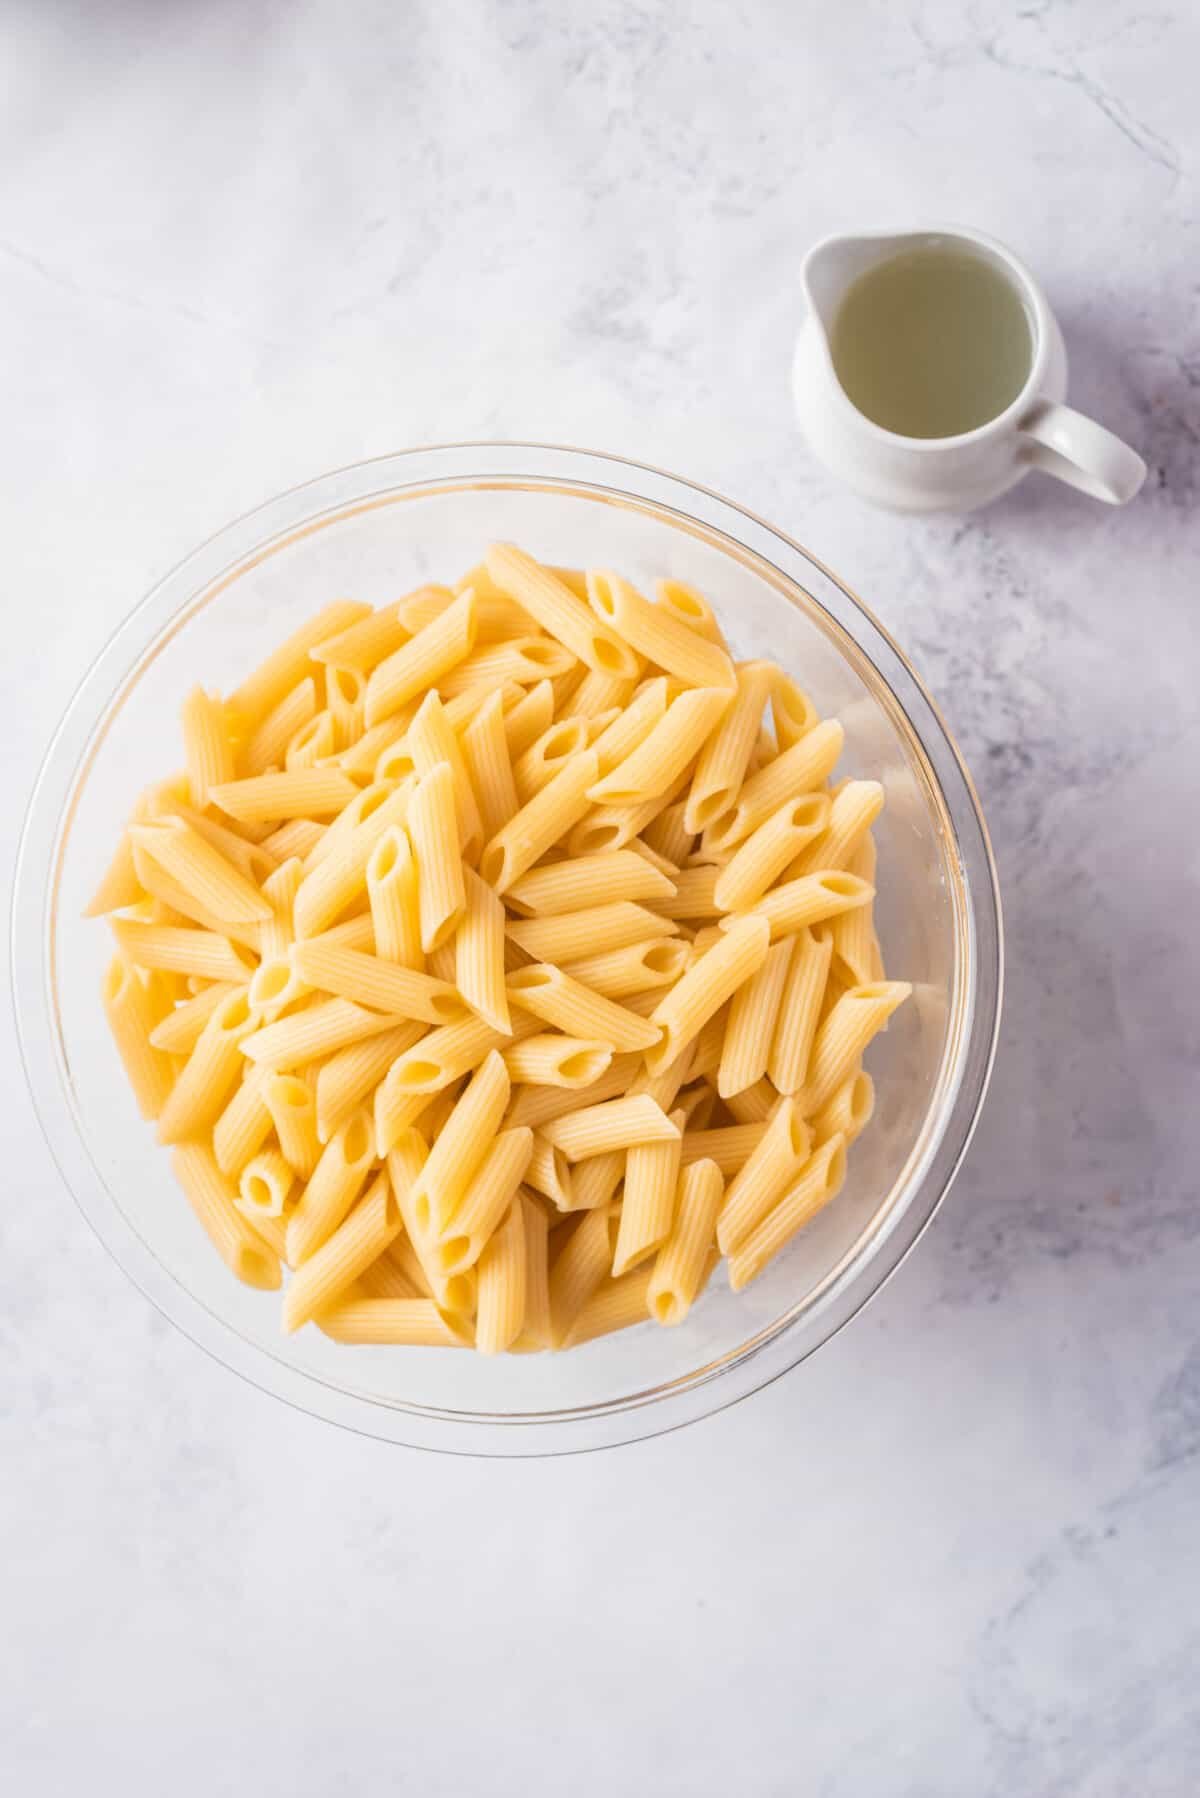 Overhead view of a transparent bowl with drained pasta next to the reserved pasta water placed in a container.